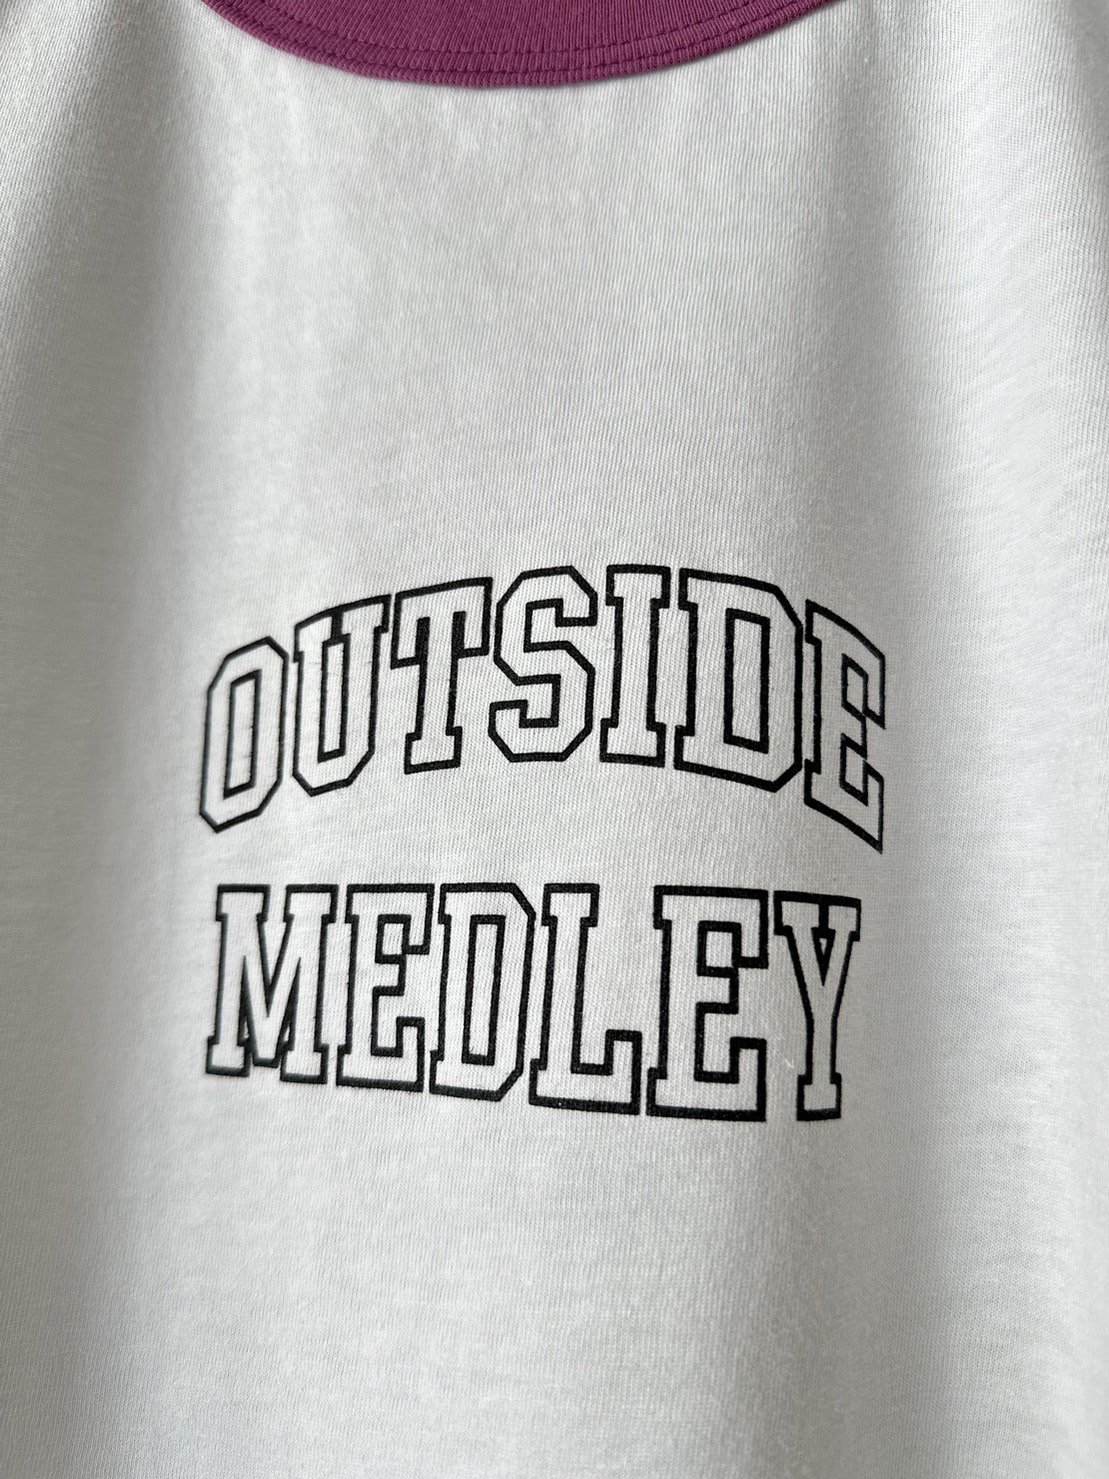 LITTLEBIG<br />OUTSIDE MEDLEY TS / Grey <img class='new_mark_img2' src='https://img.shop-pro.jp/img/new/icons14.gif' style='border:none;display:inline;margin:0px;padding:0px;width:auto;' />